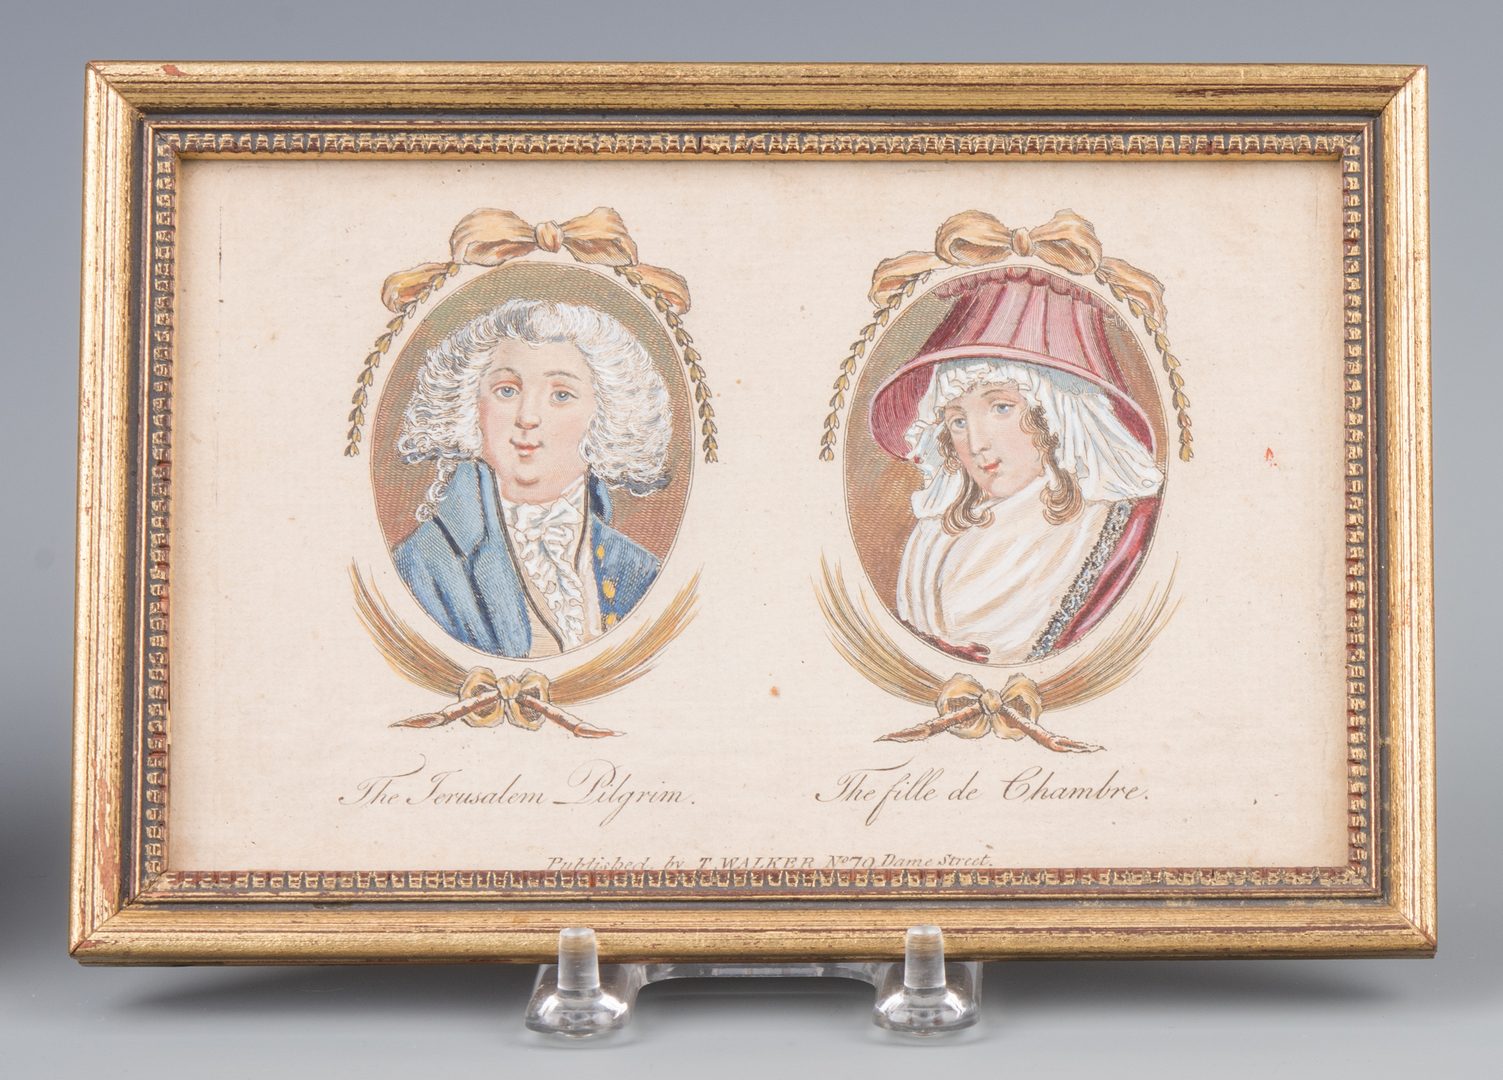 Lot 283: Pr. French Empire Style Tole Cachepots & Lithographic Portraits